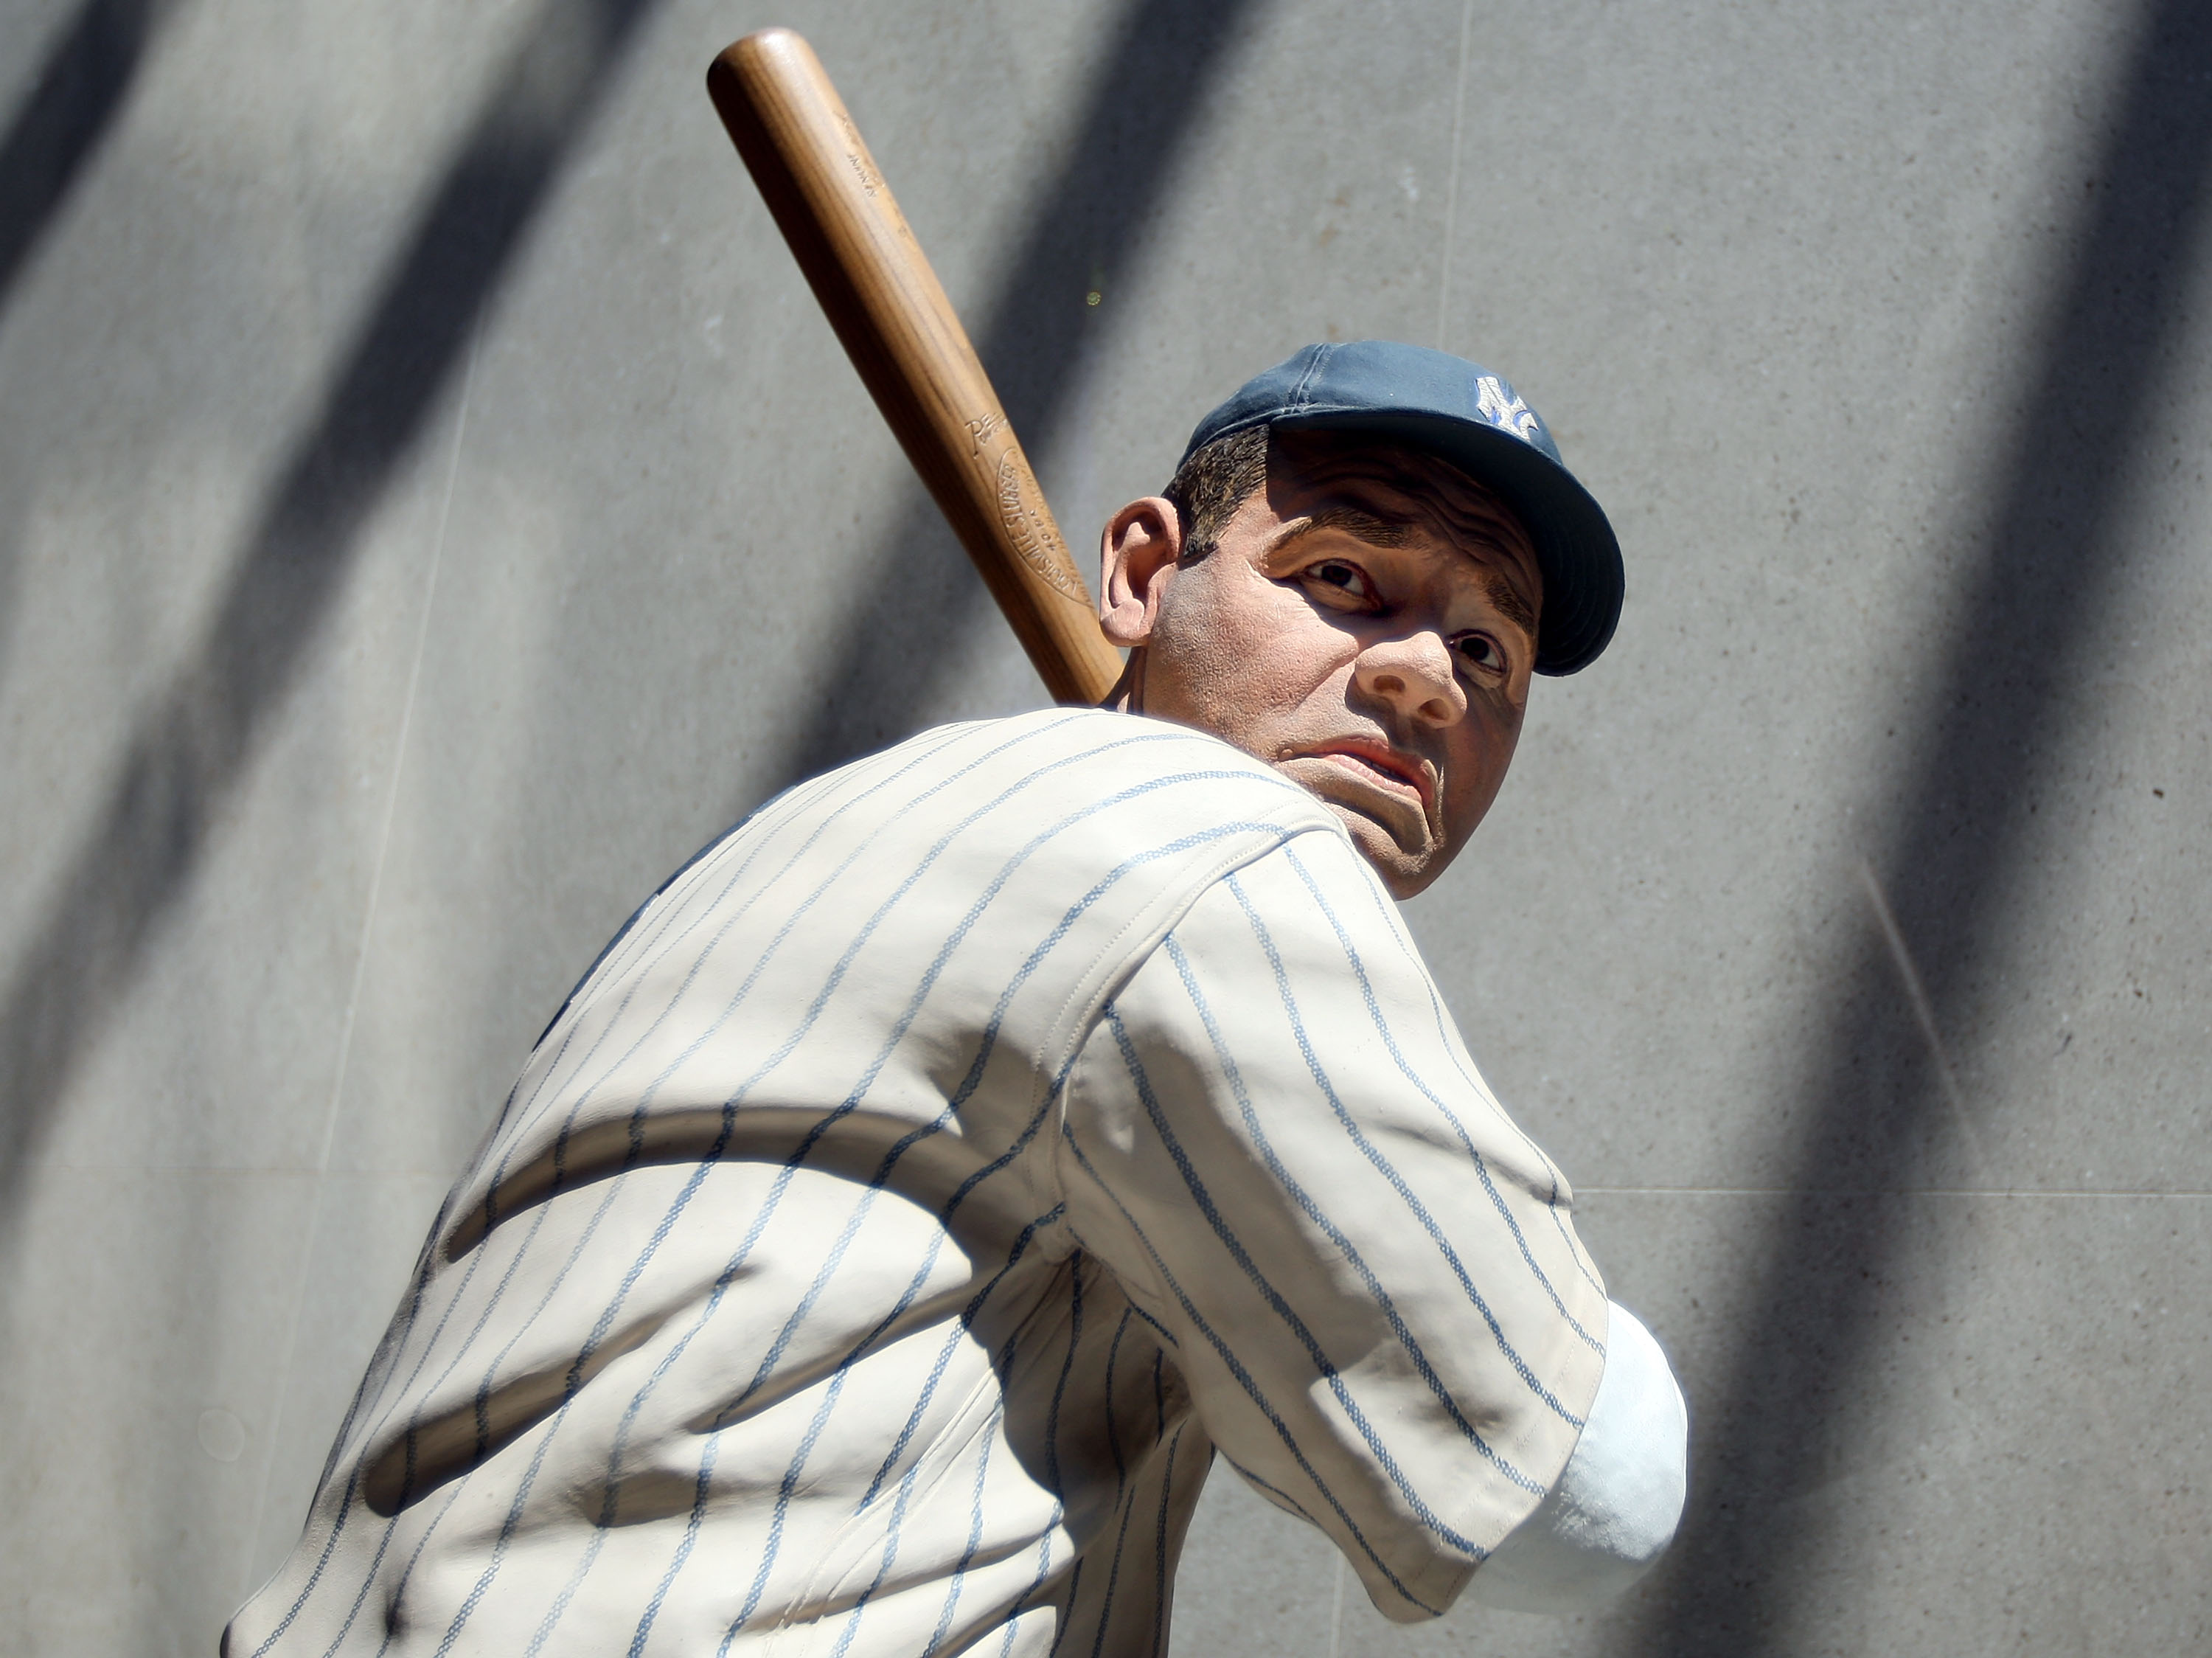 COOPERSTOWN, NY - JULY 25:  A statue of Babe Ruth is seen at the National Baseball Hall of Fame during induction weekend on July 25, 2009 in Cooperstown, New York.  (Photo by Jim McIsaac/Getty Images)